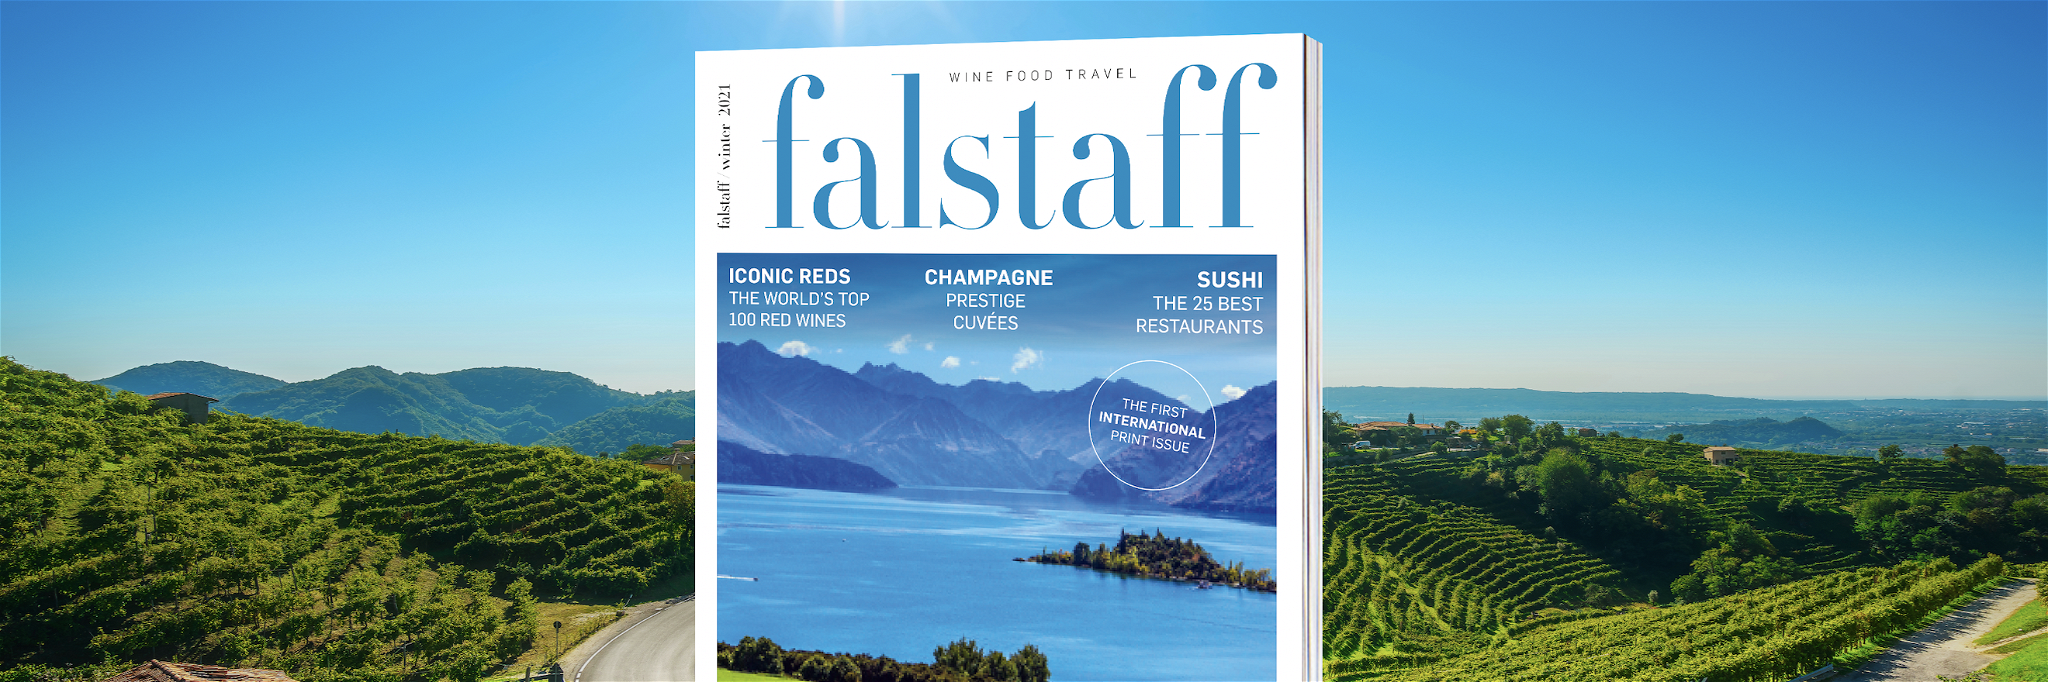 Falstaff Magazine, a new glossy publication dedicated to wine, food and travel.&nbsp;